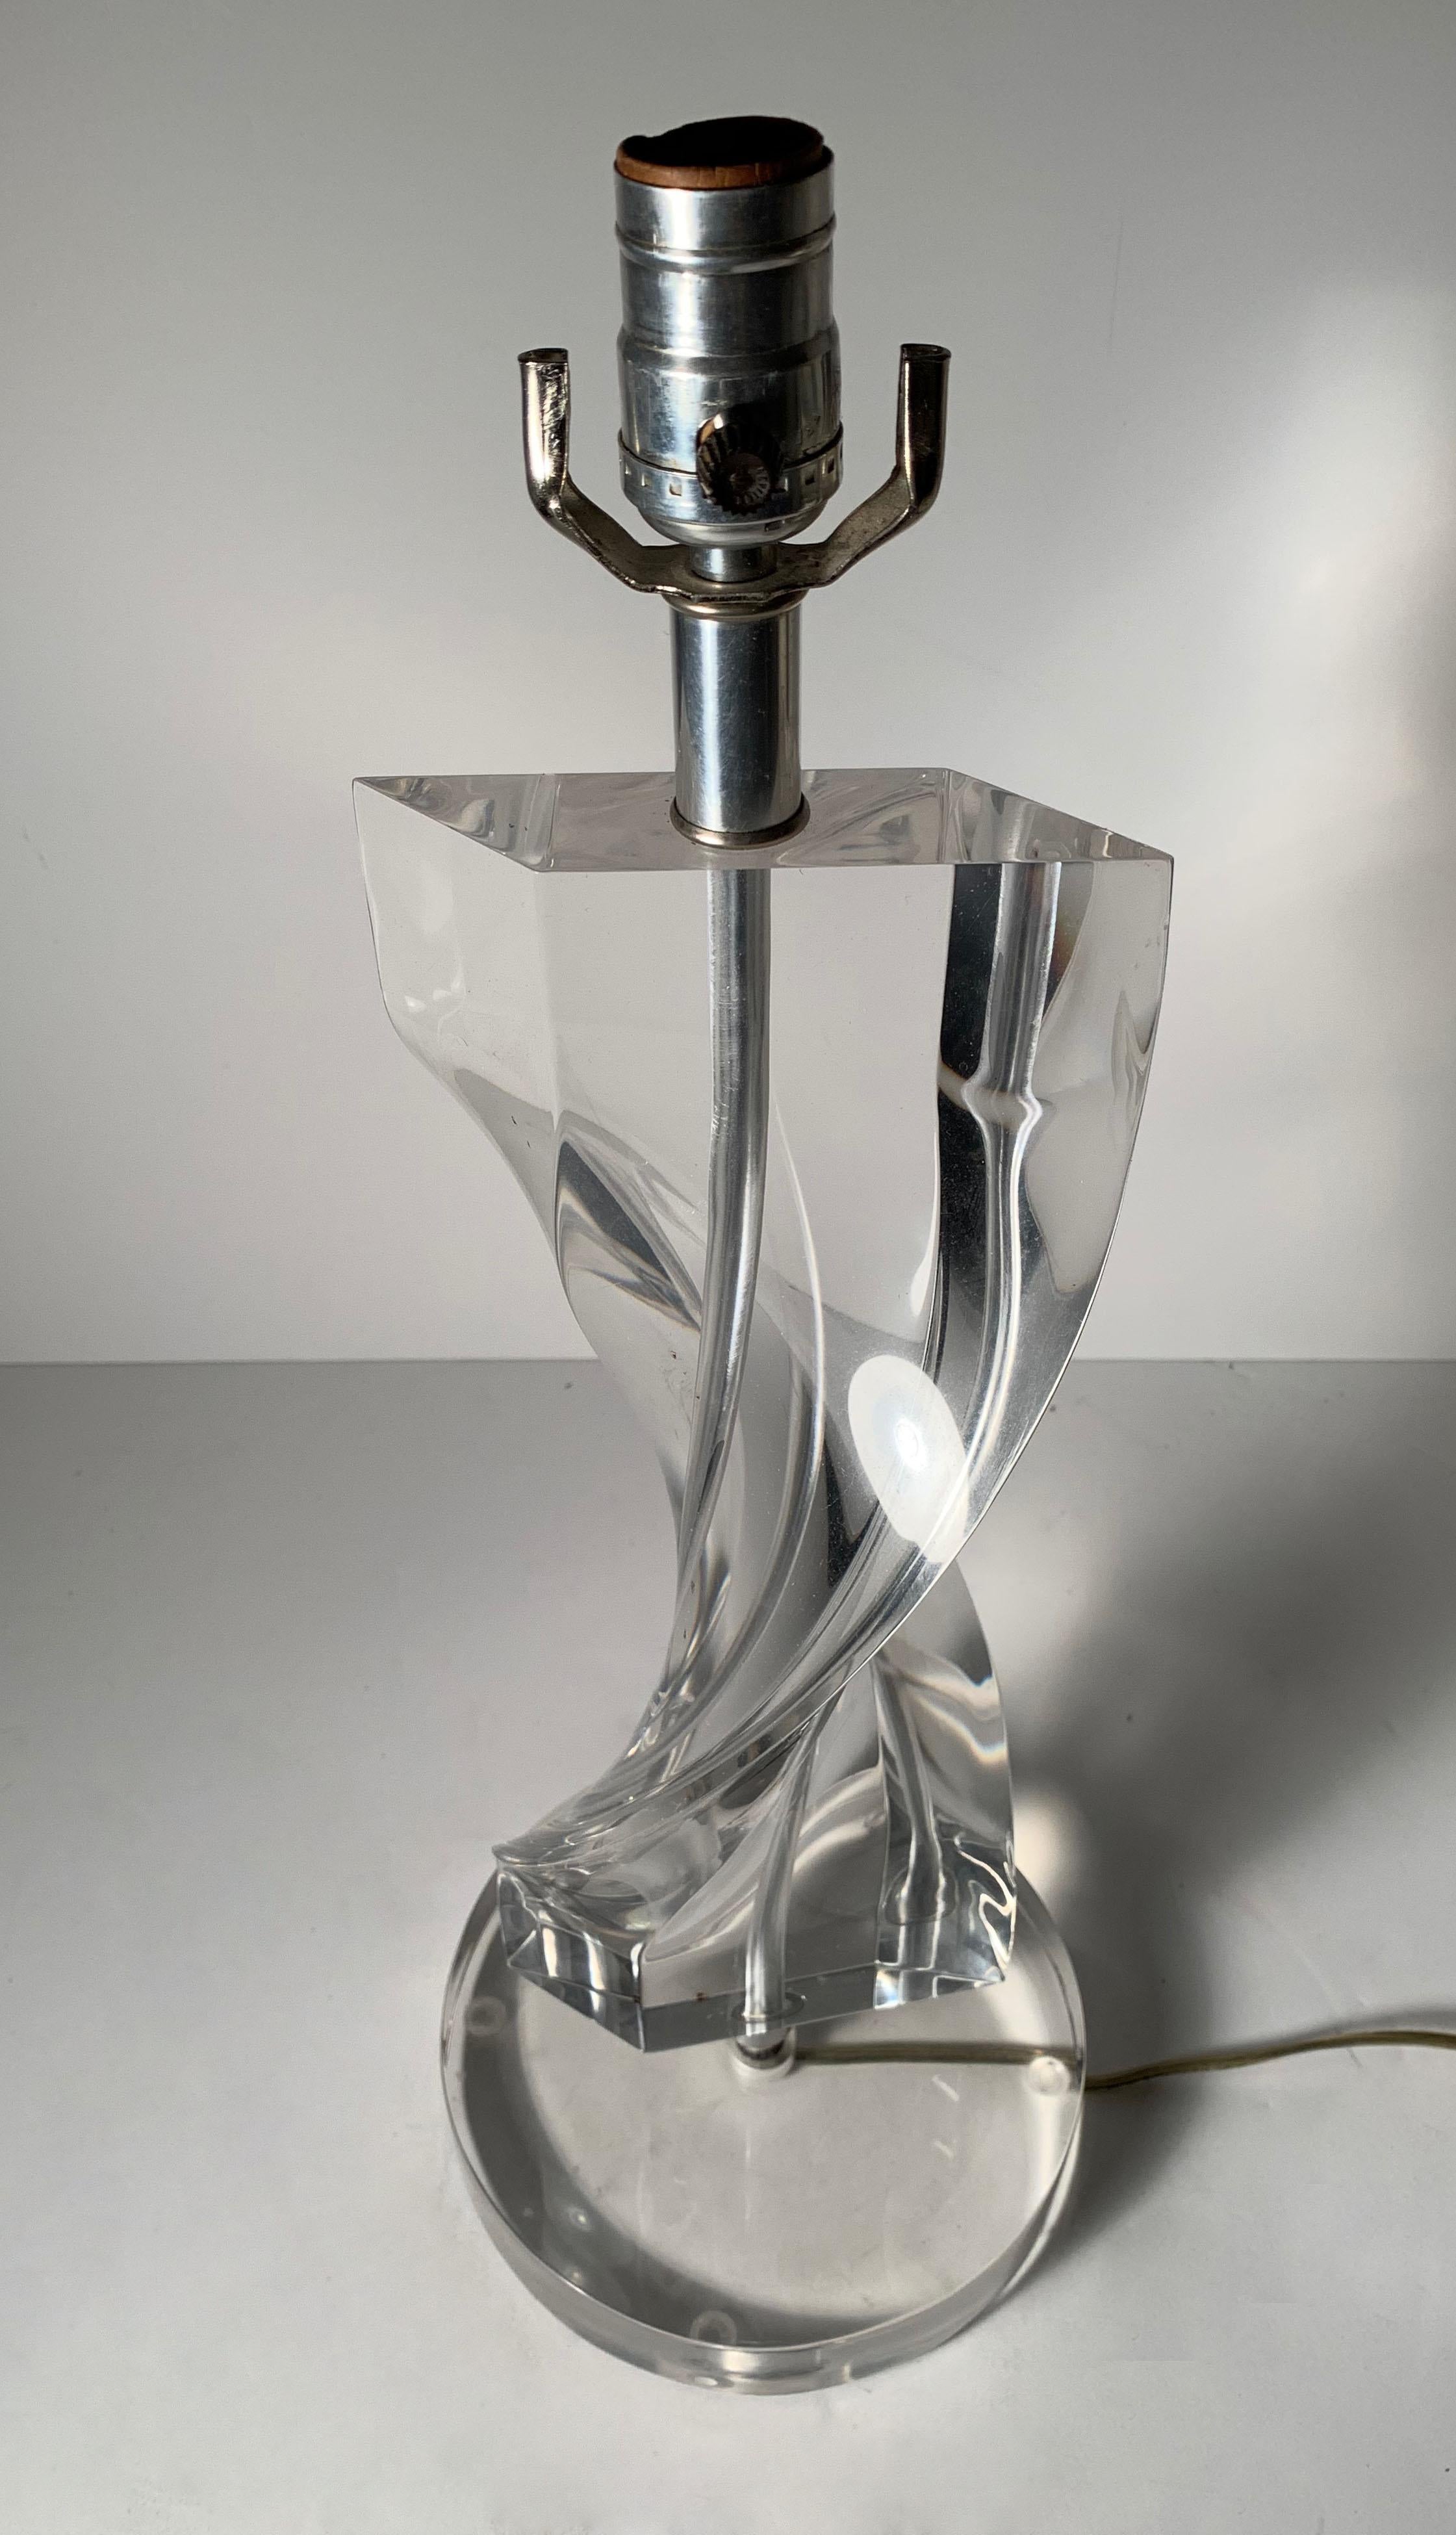 American Vintage Lucite Helix Twist Lamp by Herbert Ritts for Astrolite California For Sale